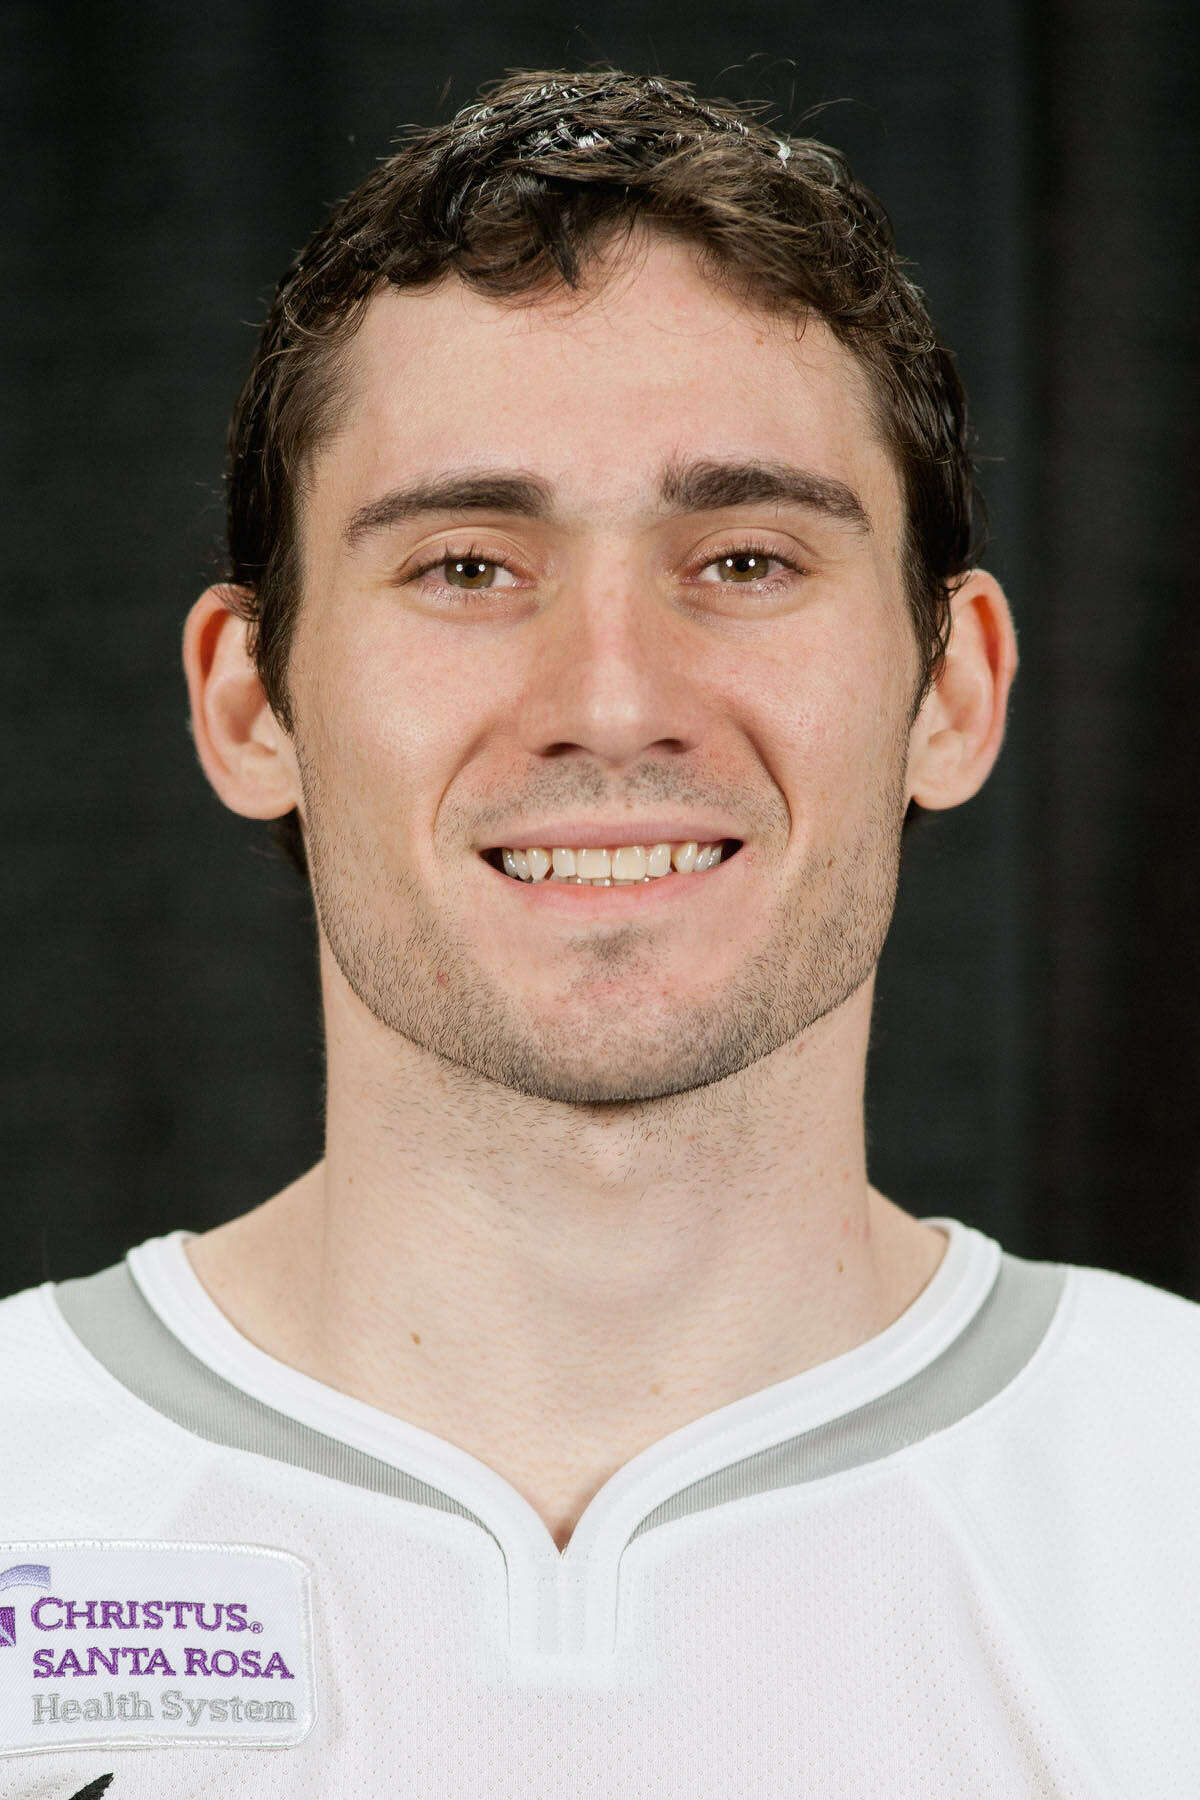 Dov Grumet-Morris stopped a career-high 49 shots, including four in the shootout.